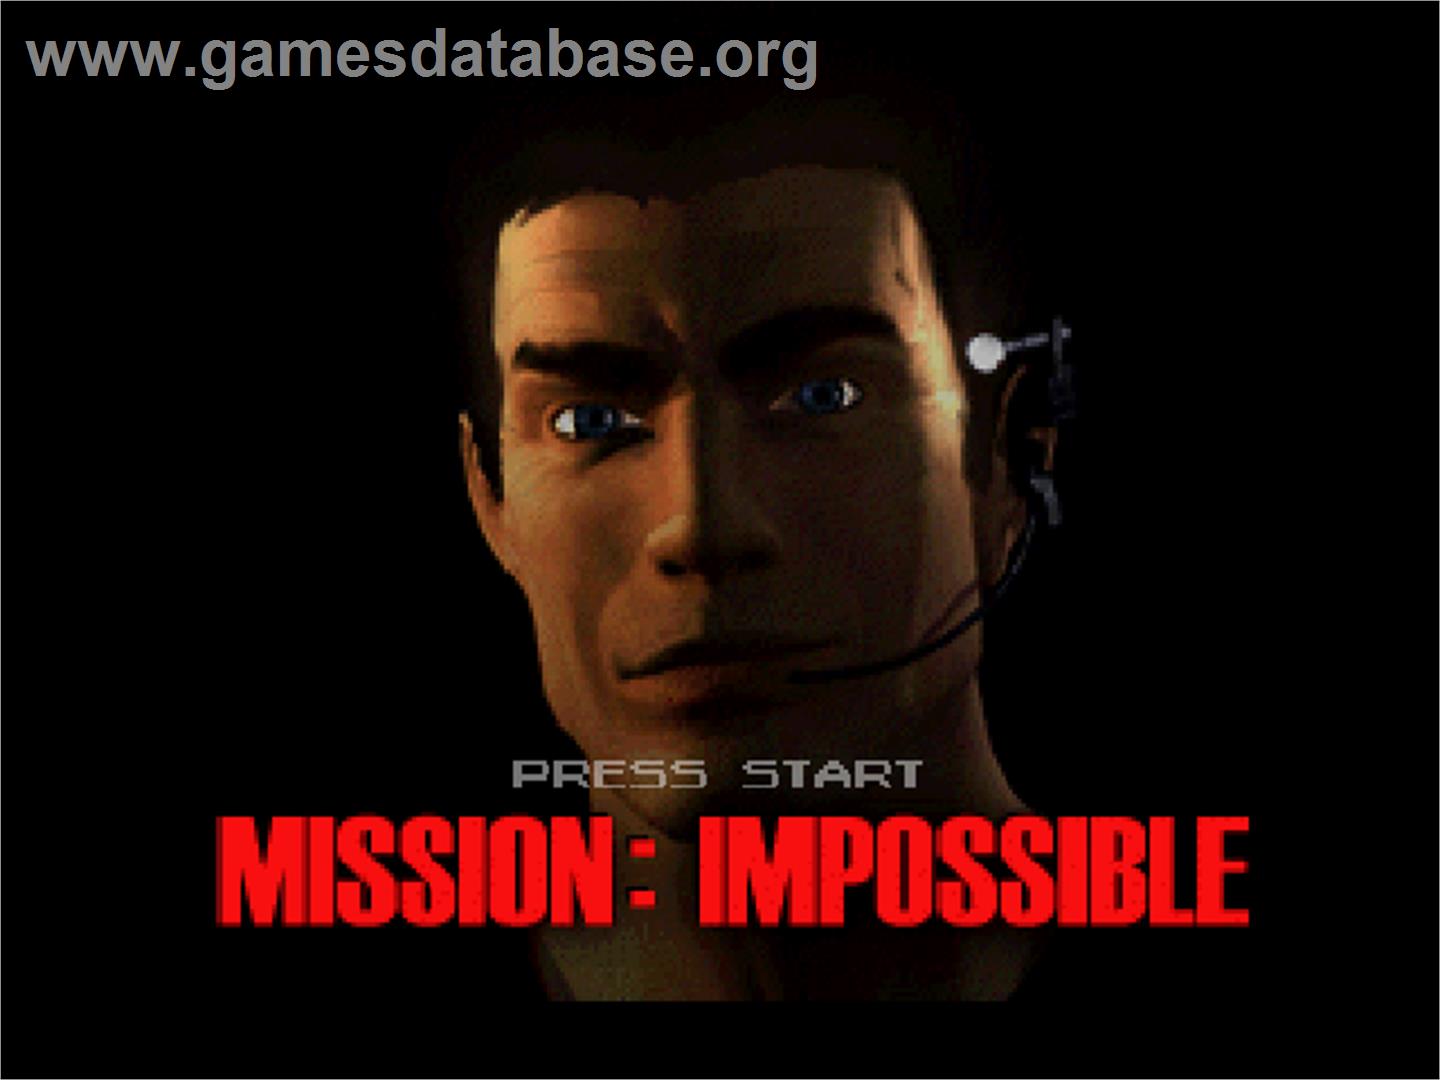 Mission Impossible - Nintendo N64 - Artwork - Title Screen